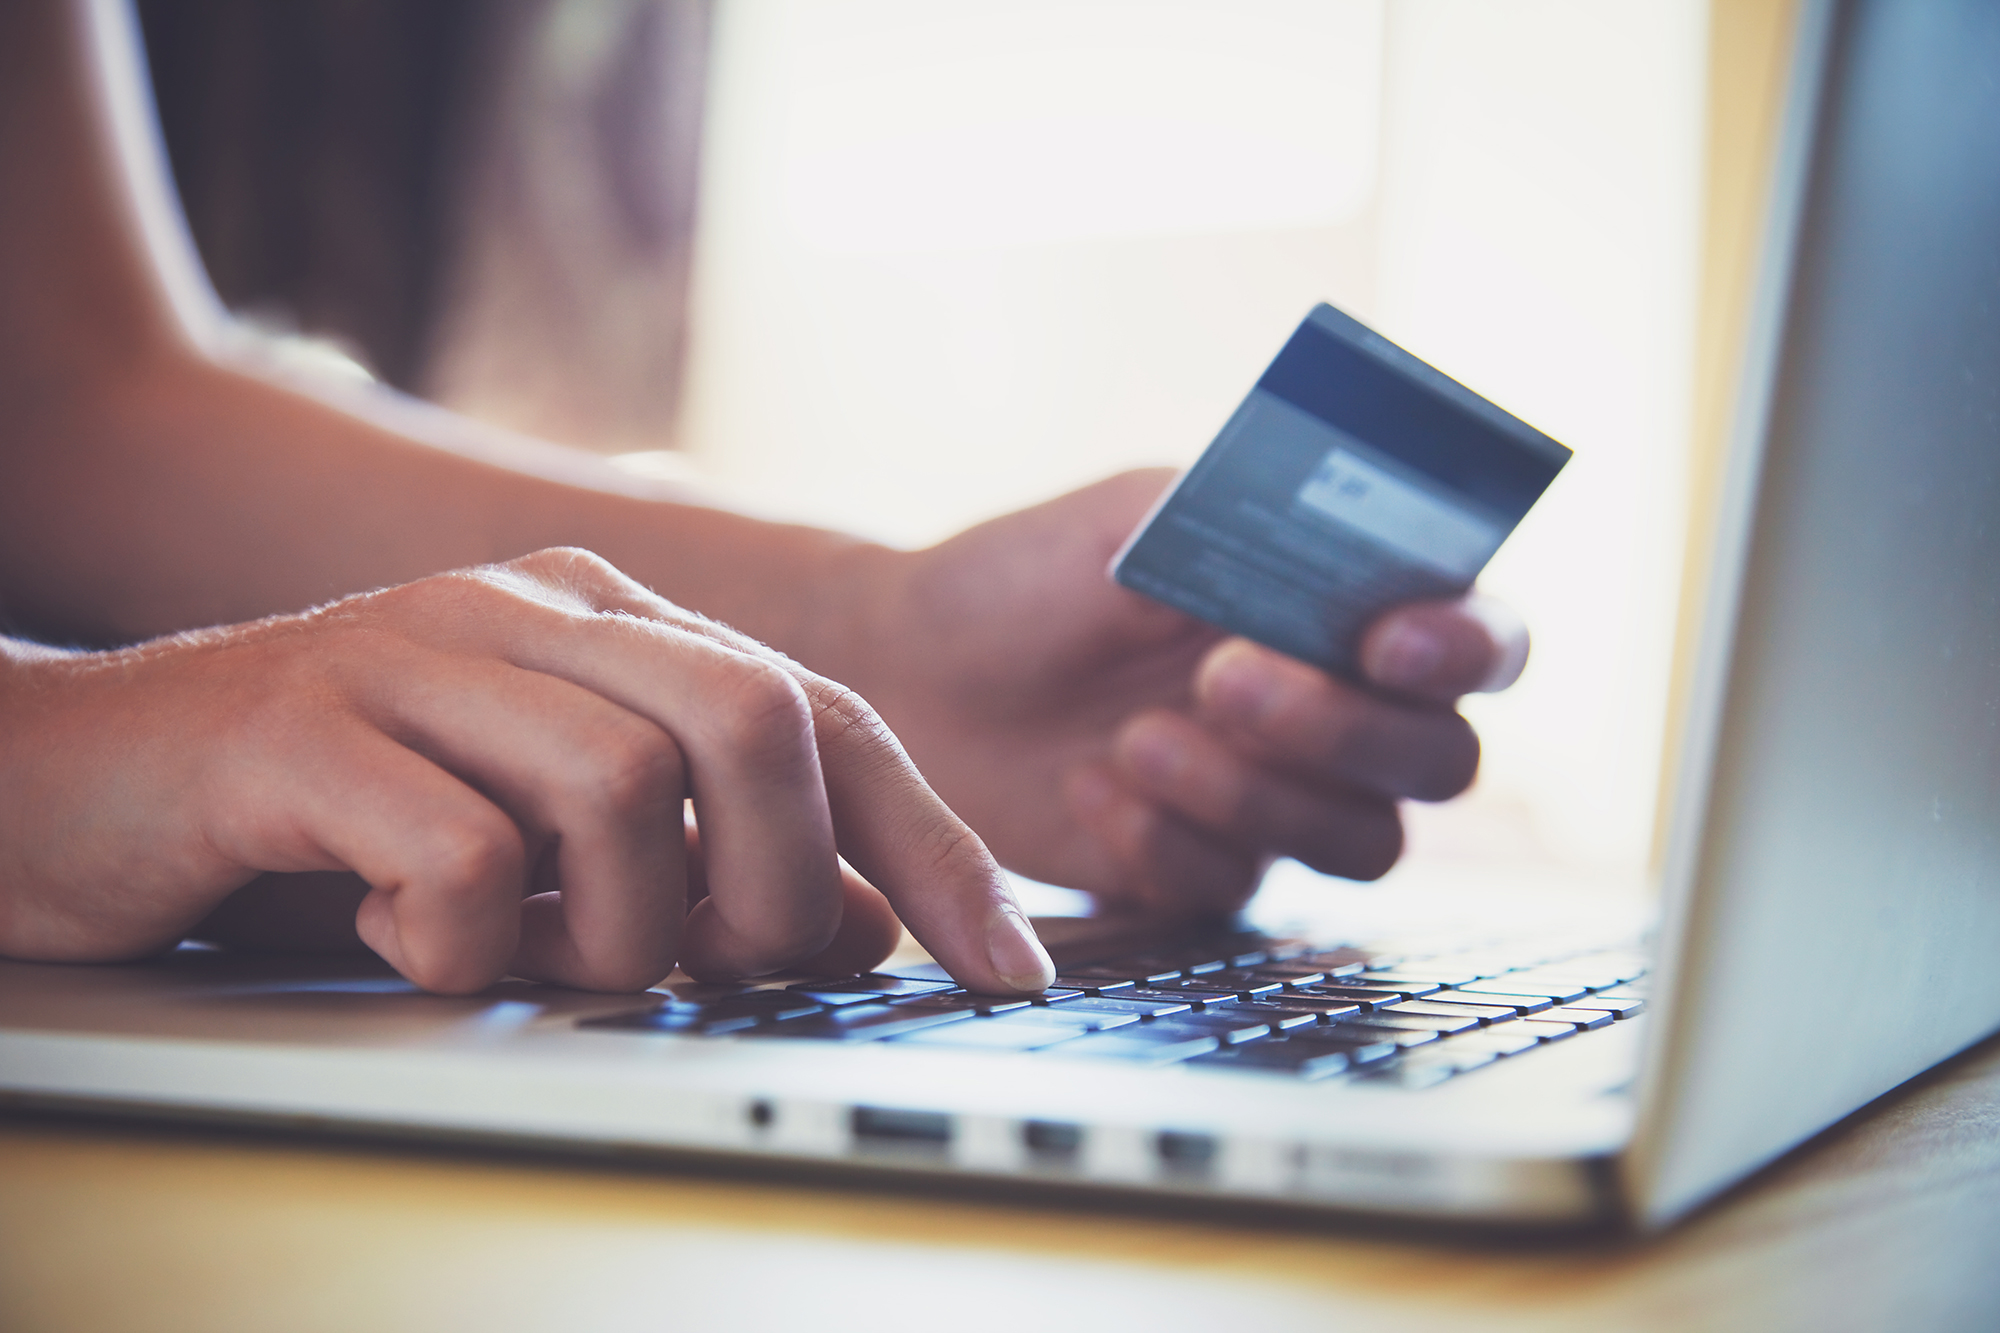 Someone using their card online. (Image: Shutterstock)